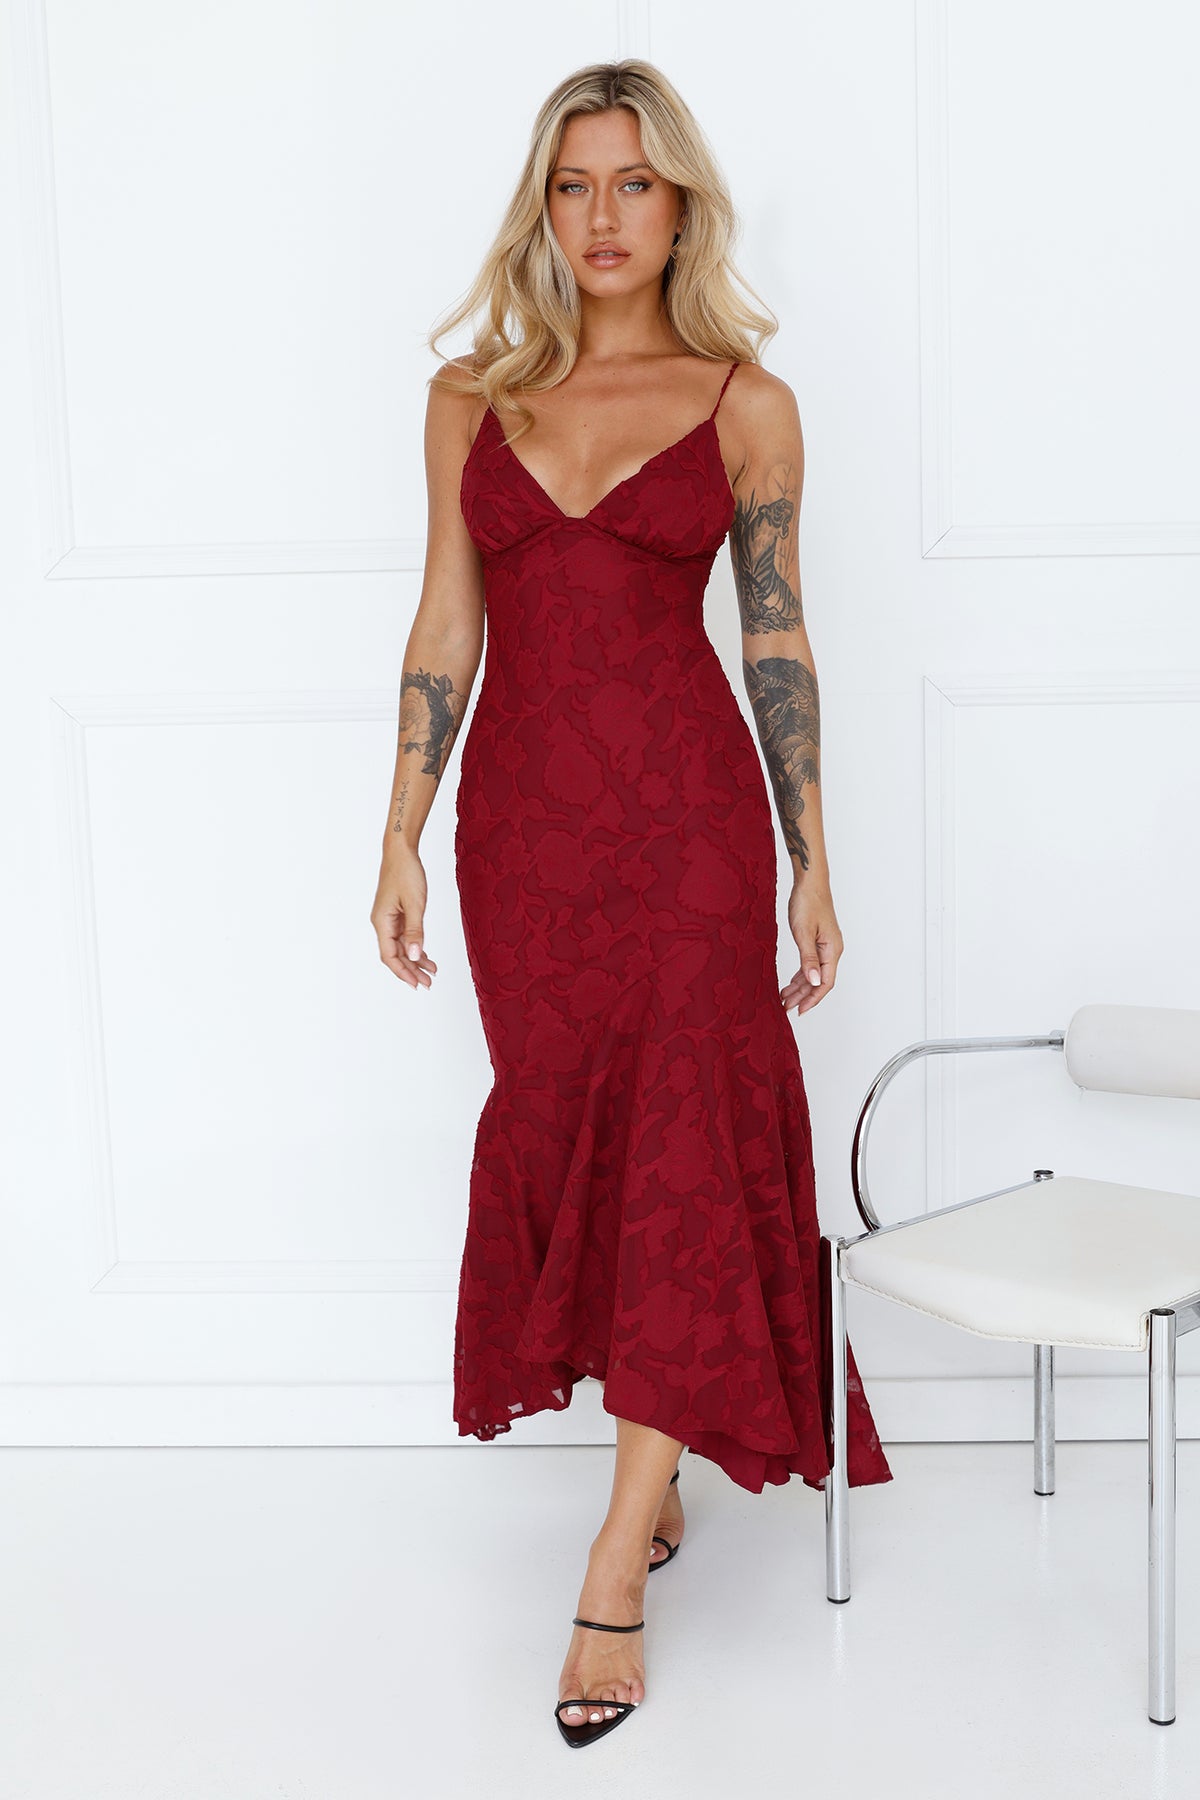 Shop Formal Dress - Events Countryside Maxi Dress Wine featured image